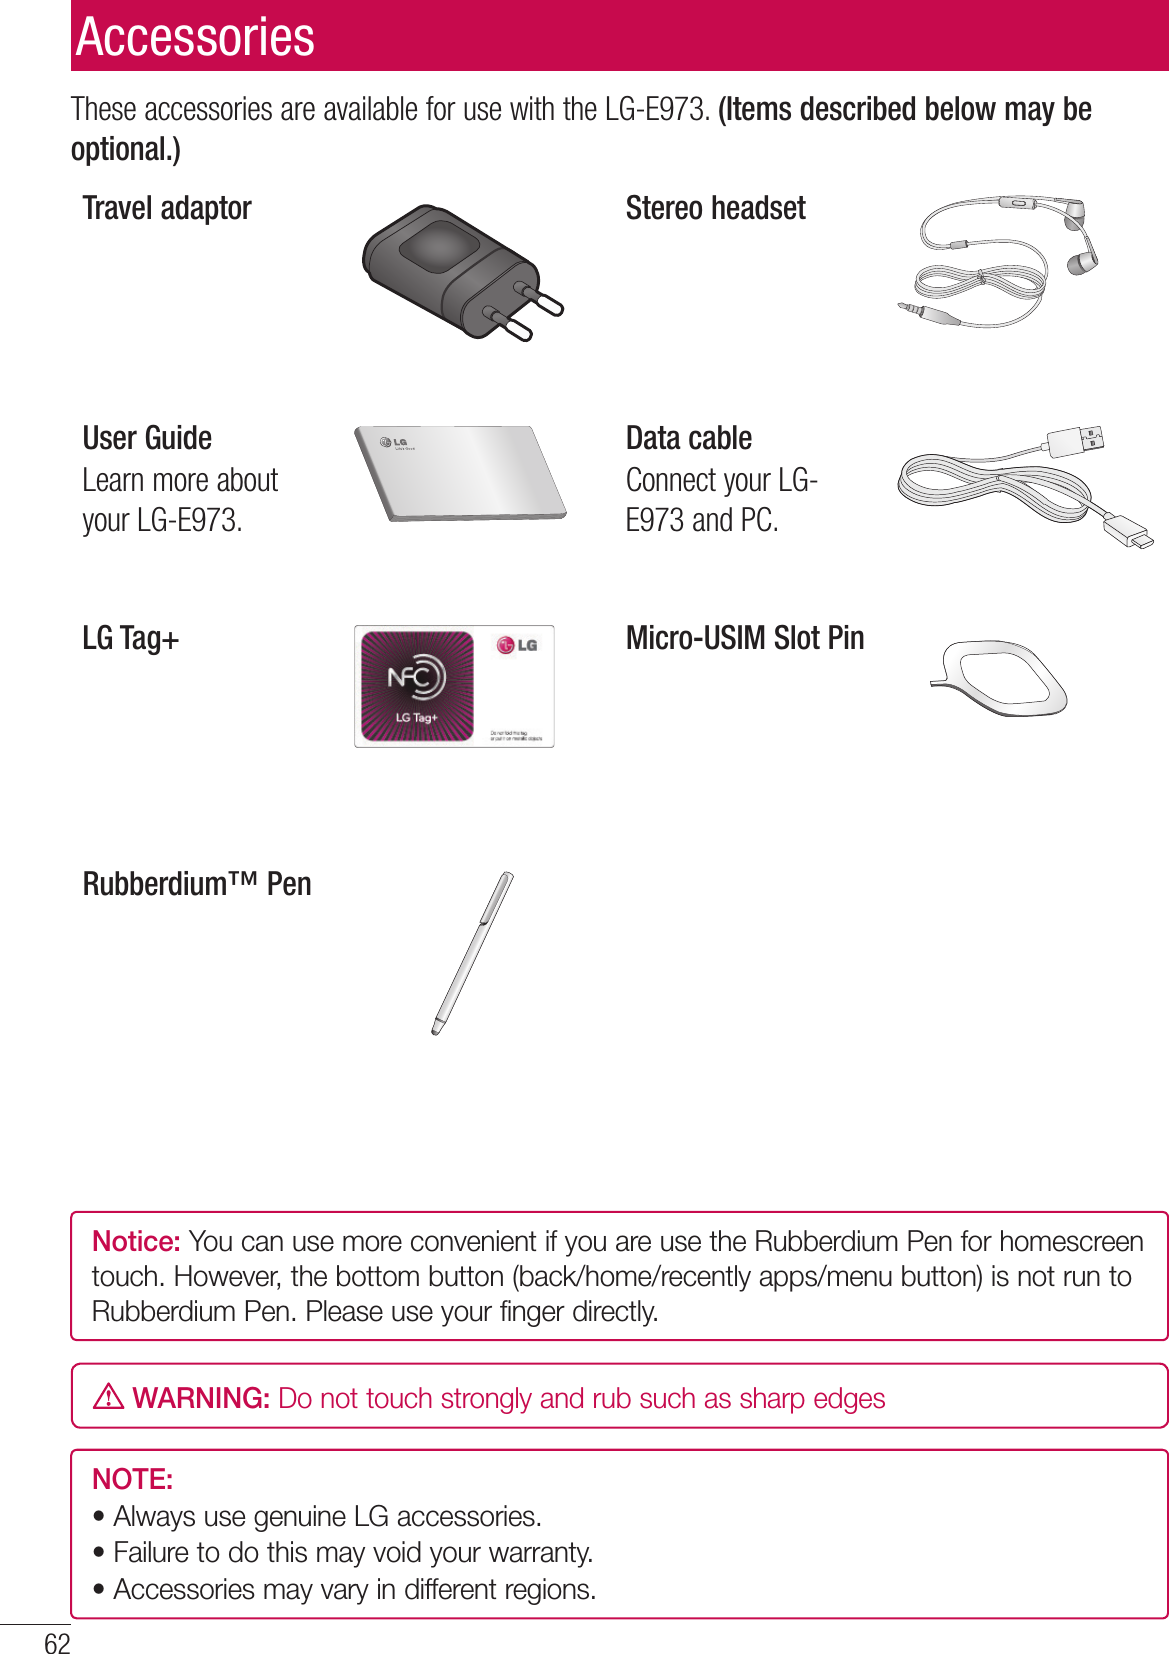 62These accessories are available for use with the LG-E973. (Items described below may be optional.)Travel adaptor Stereo headsetUser GuideLearn more about your LG-E973.Data cableConnect your LG-E973 and PC.LG Tag+ Micro-USIM Slot PinRubberdium™ PenNOTE: •  Always use genuine LG accessories. •  Failure to do this may void your warranty.•  Accessories may vary in different regions.AccessoriesNotice: You can use more convenient if you are use the Rubberdium Pen for homescreen touch. However, the bottom button (back/home/recently apps/menu button) is not run to Rubberdium Pen. Please use your finger directly. WARNING: Do not touch strongly and rub such as sharp edges